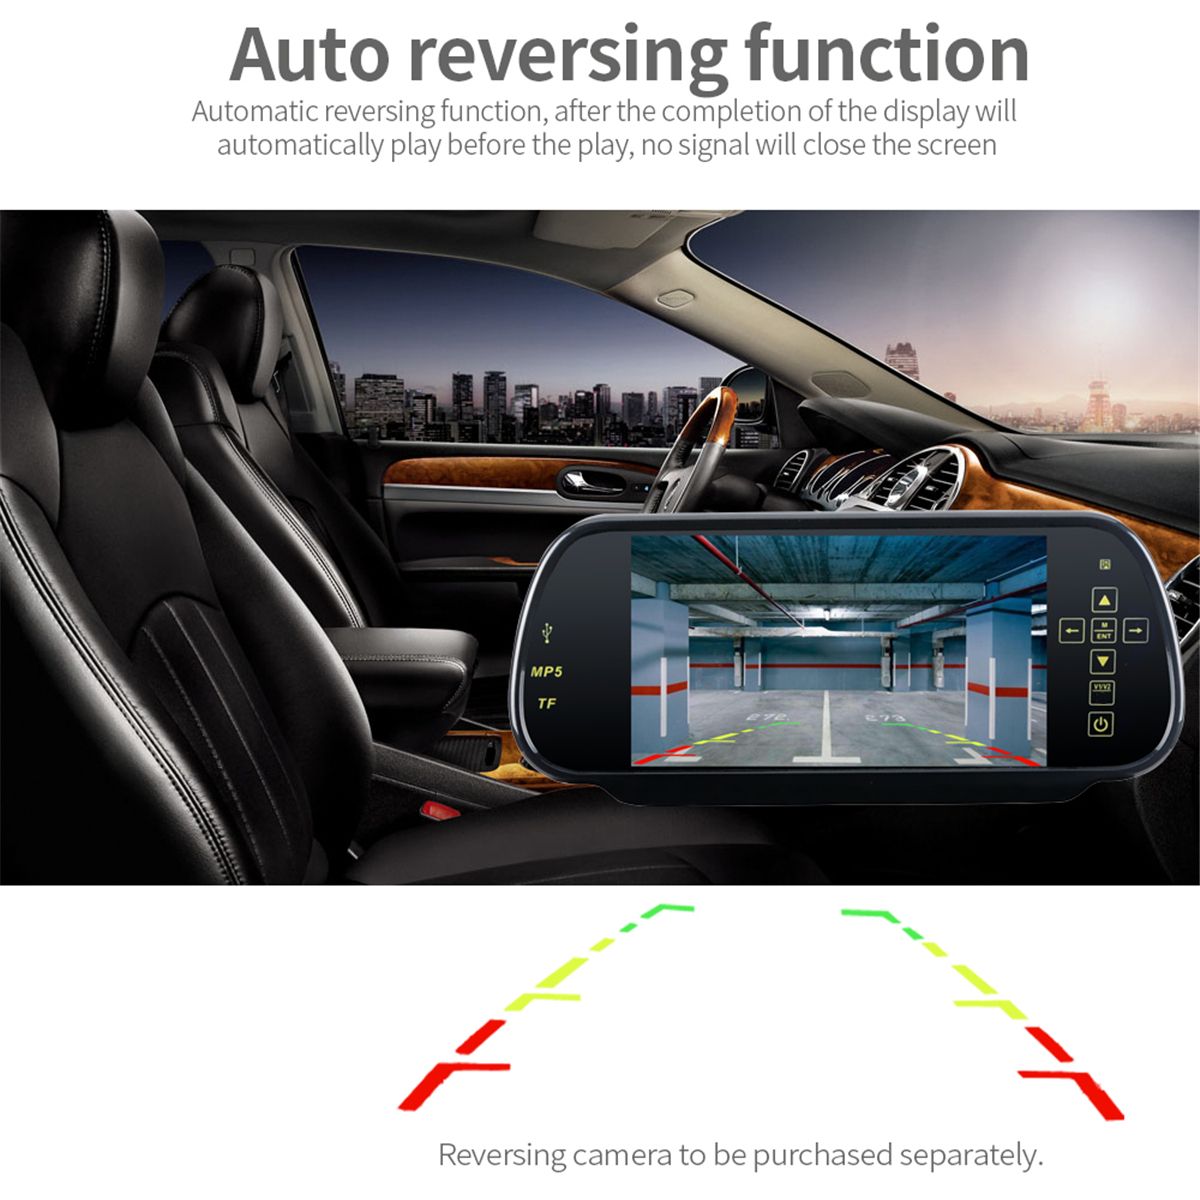 7-Inch-bluetooth-Hands-free-Car-MP5-Player-Rearview-Mirror-Display-With-Rear-View-Camera-1324655